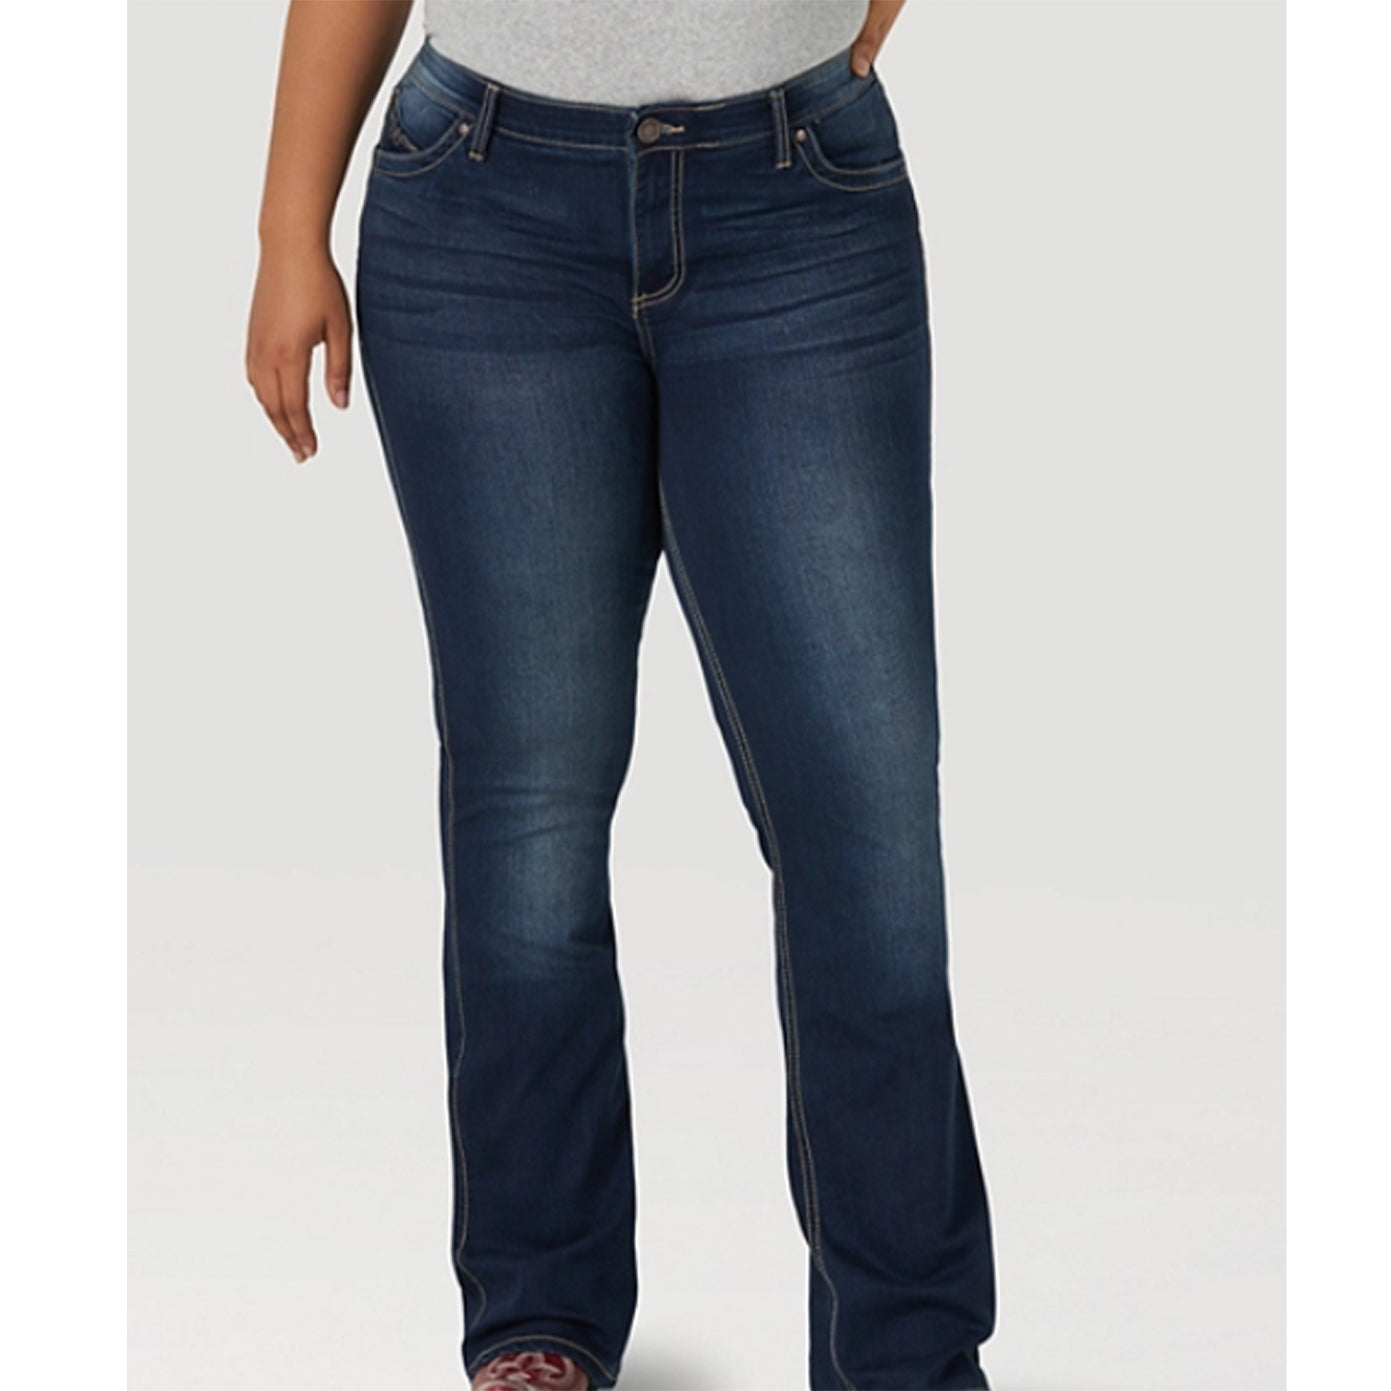 Women's Ultimate Riding Q-Baby Jeans (Plus)